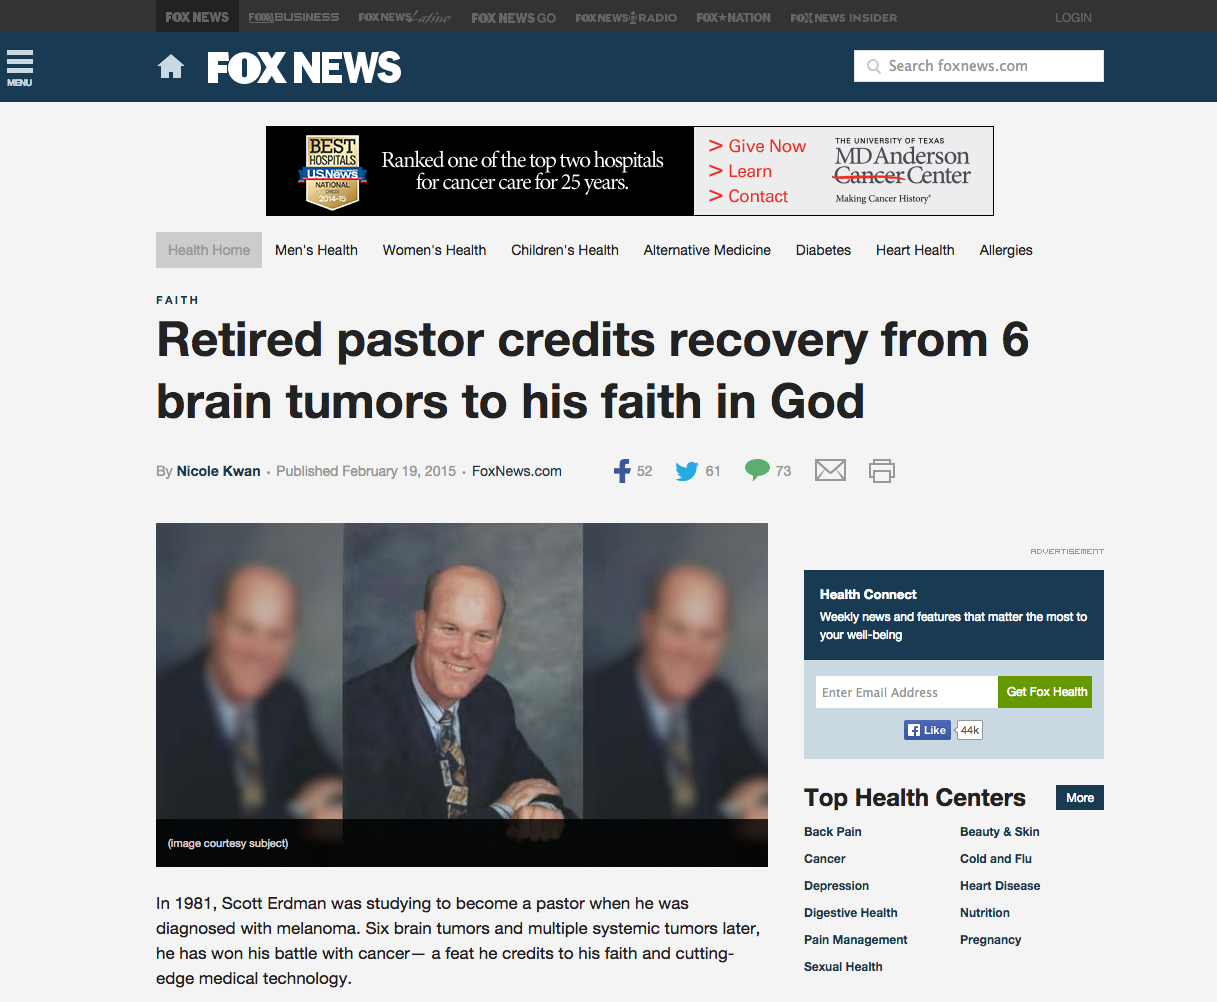 Fox News: Retired pastor credits recovery from 6 brain tumors to his faith in God